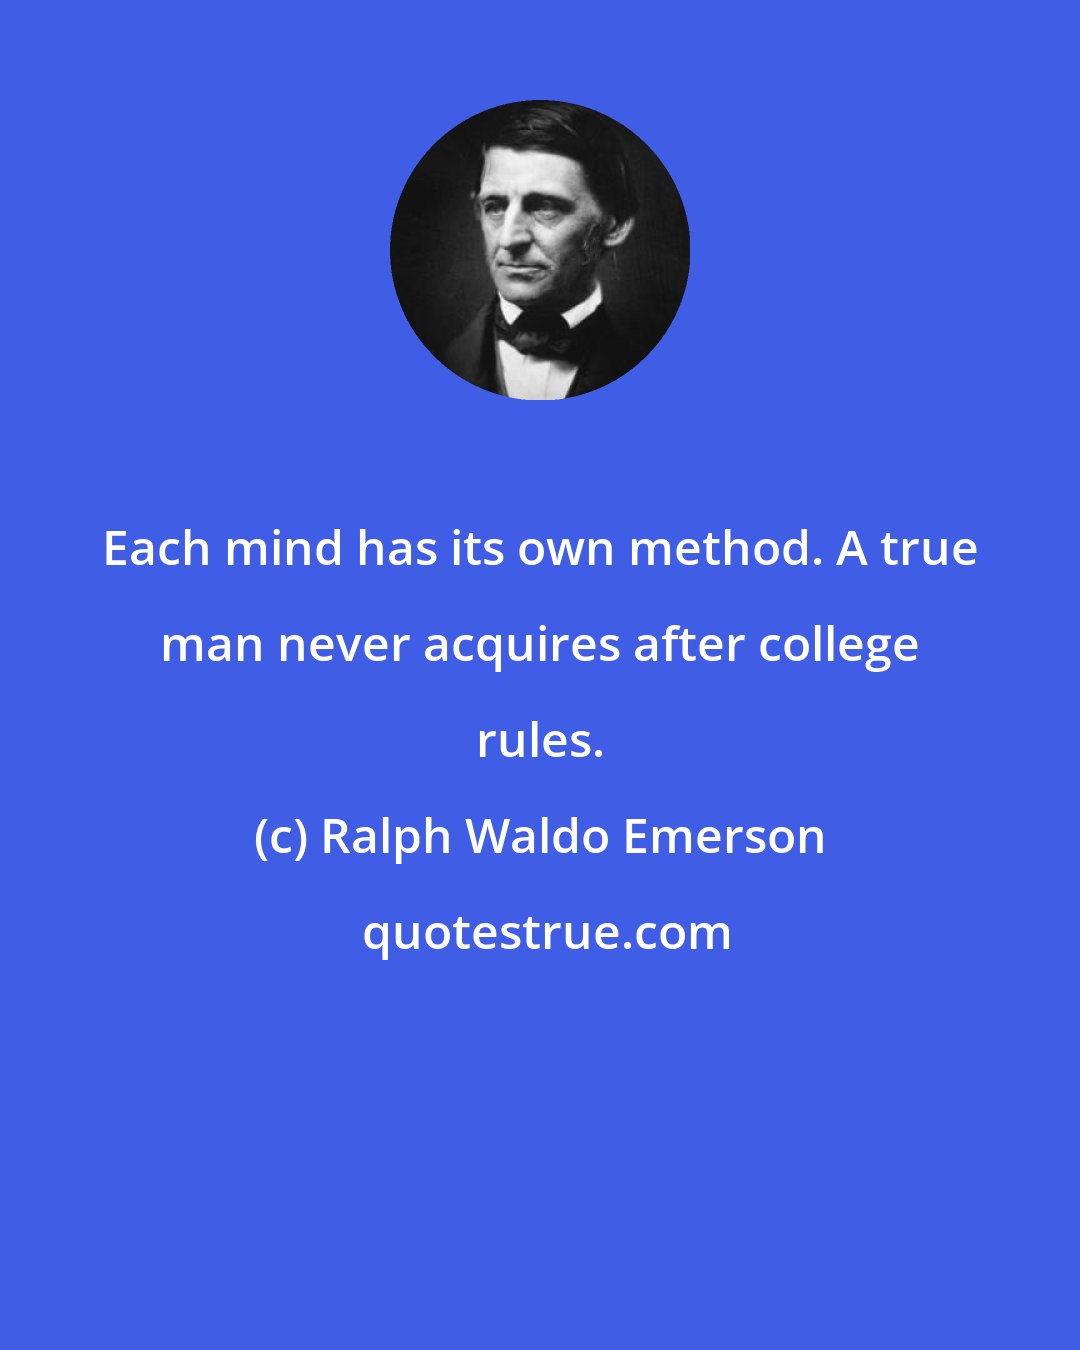 Ralph Waldo Emerson: Each mind has its own method. A true man never acquires after college rules.